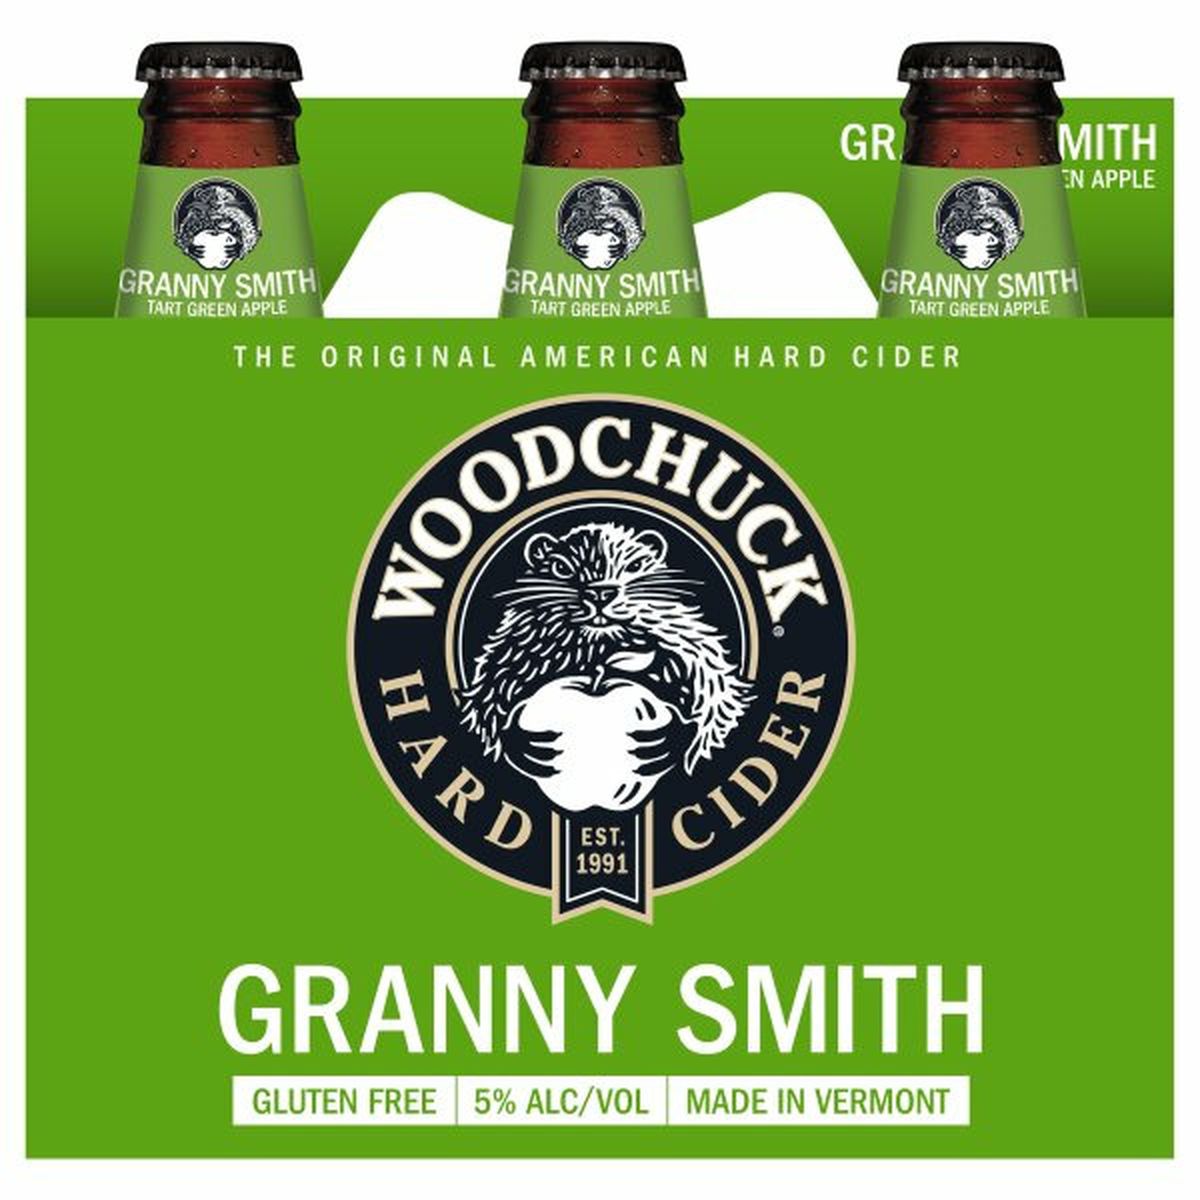 Calories in Woodchuck Hard Cider, Granny Smith 6/12 oz bottles